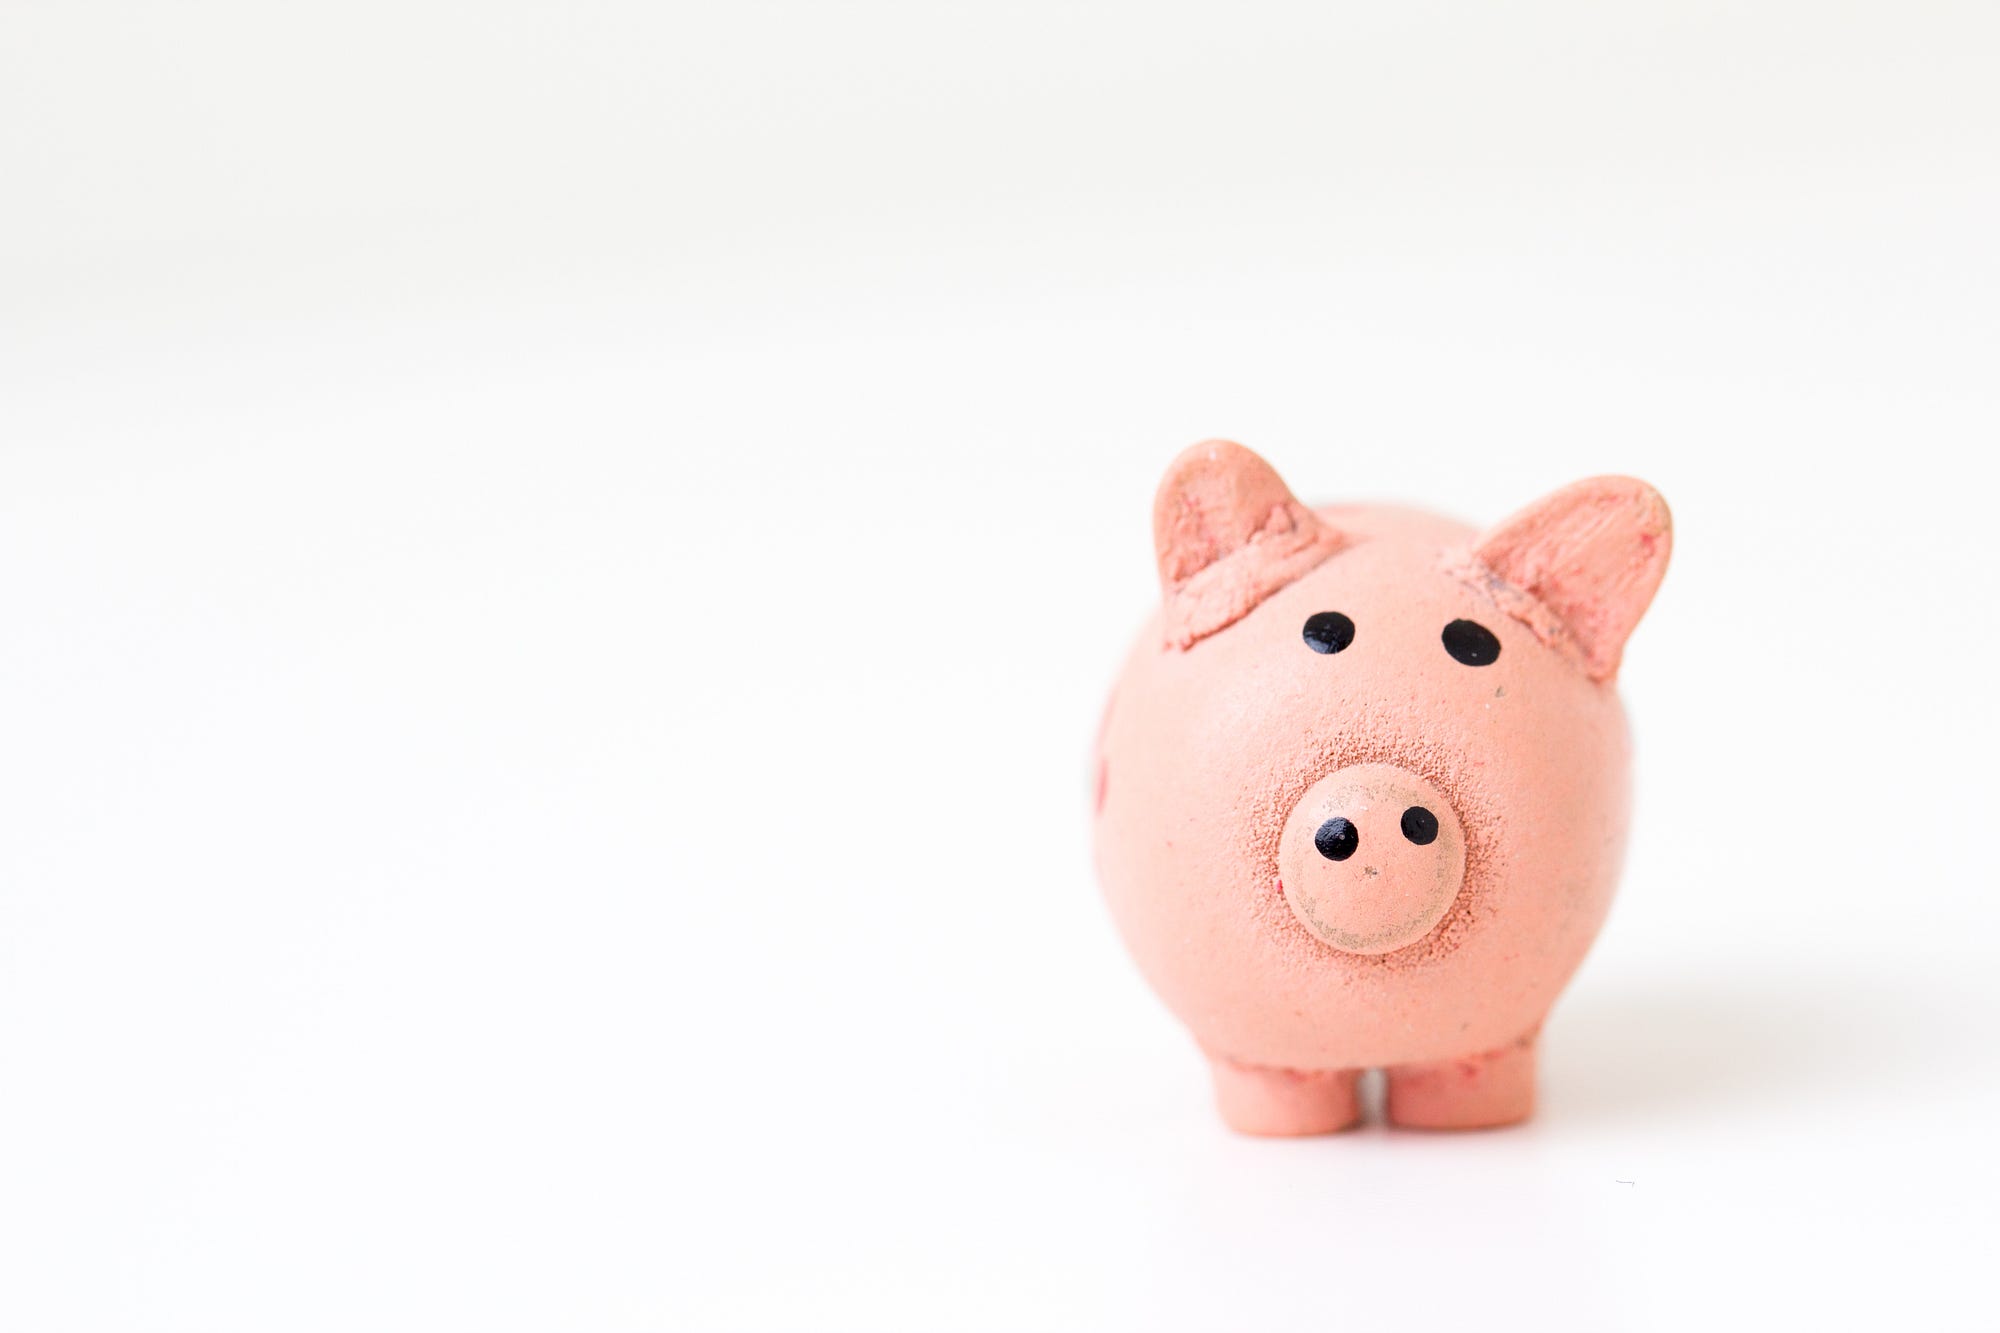 “A piggy bank on a white surface” by Fabian Blank on Unsplash